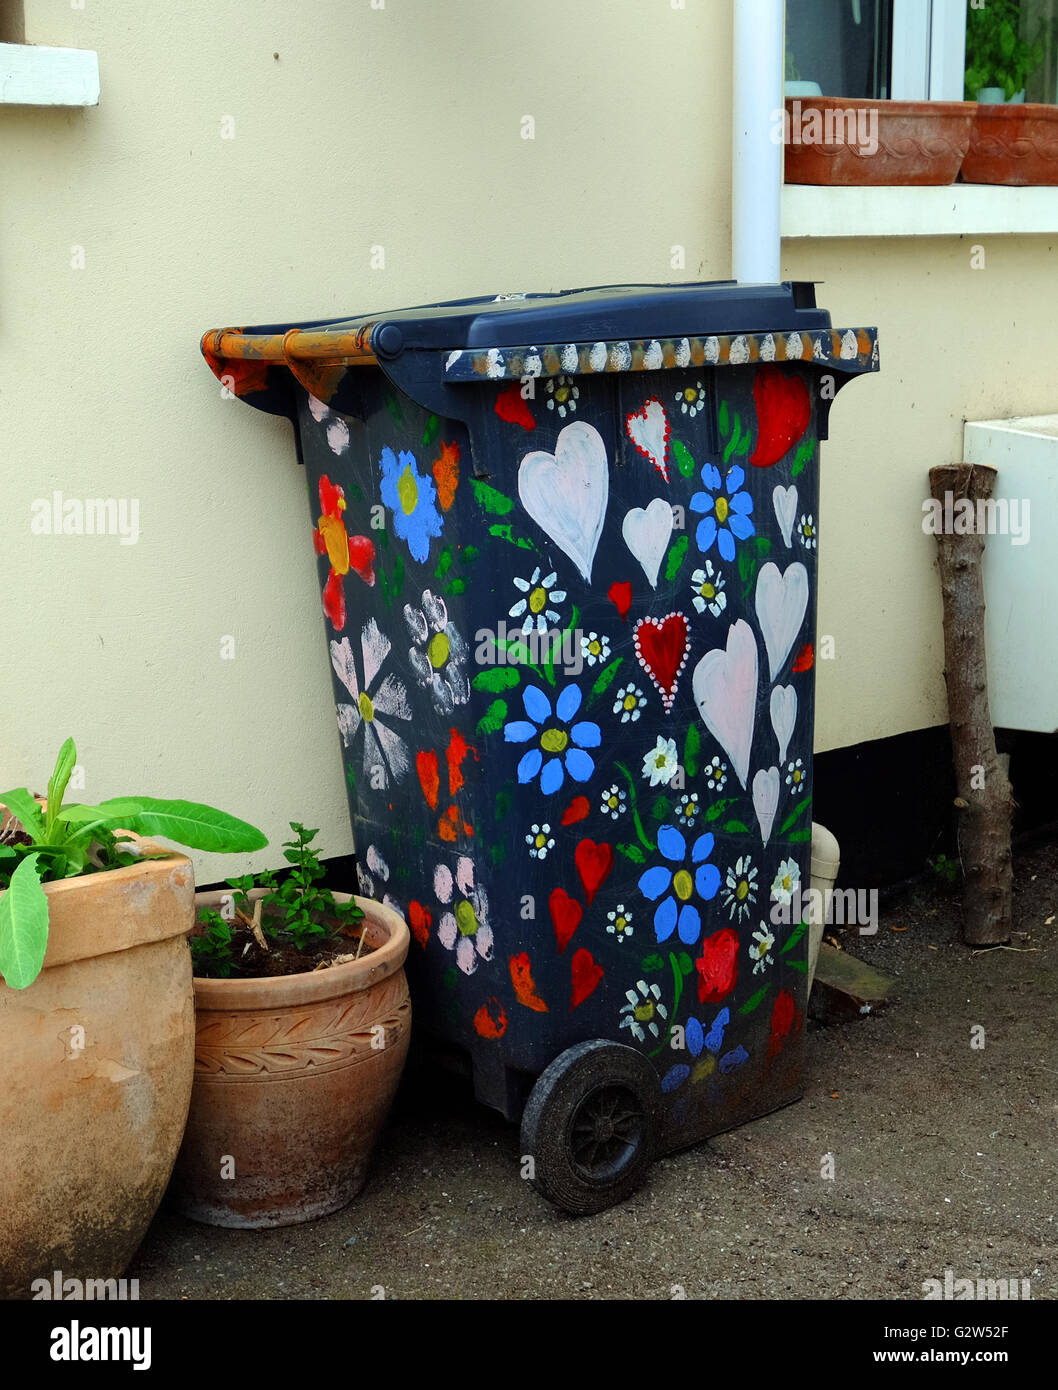 A dustbin, painted with colourful flowers and hearts. Stock Photo